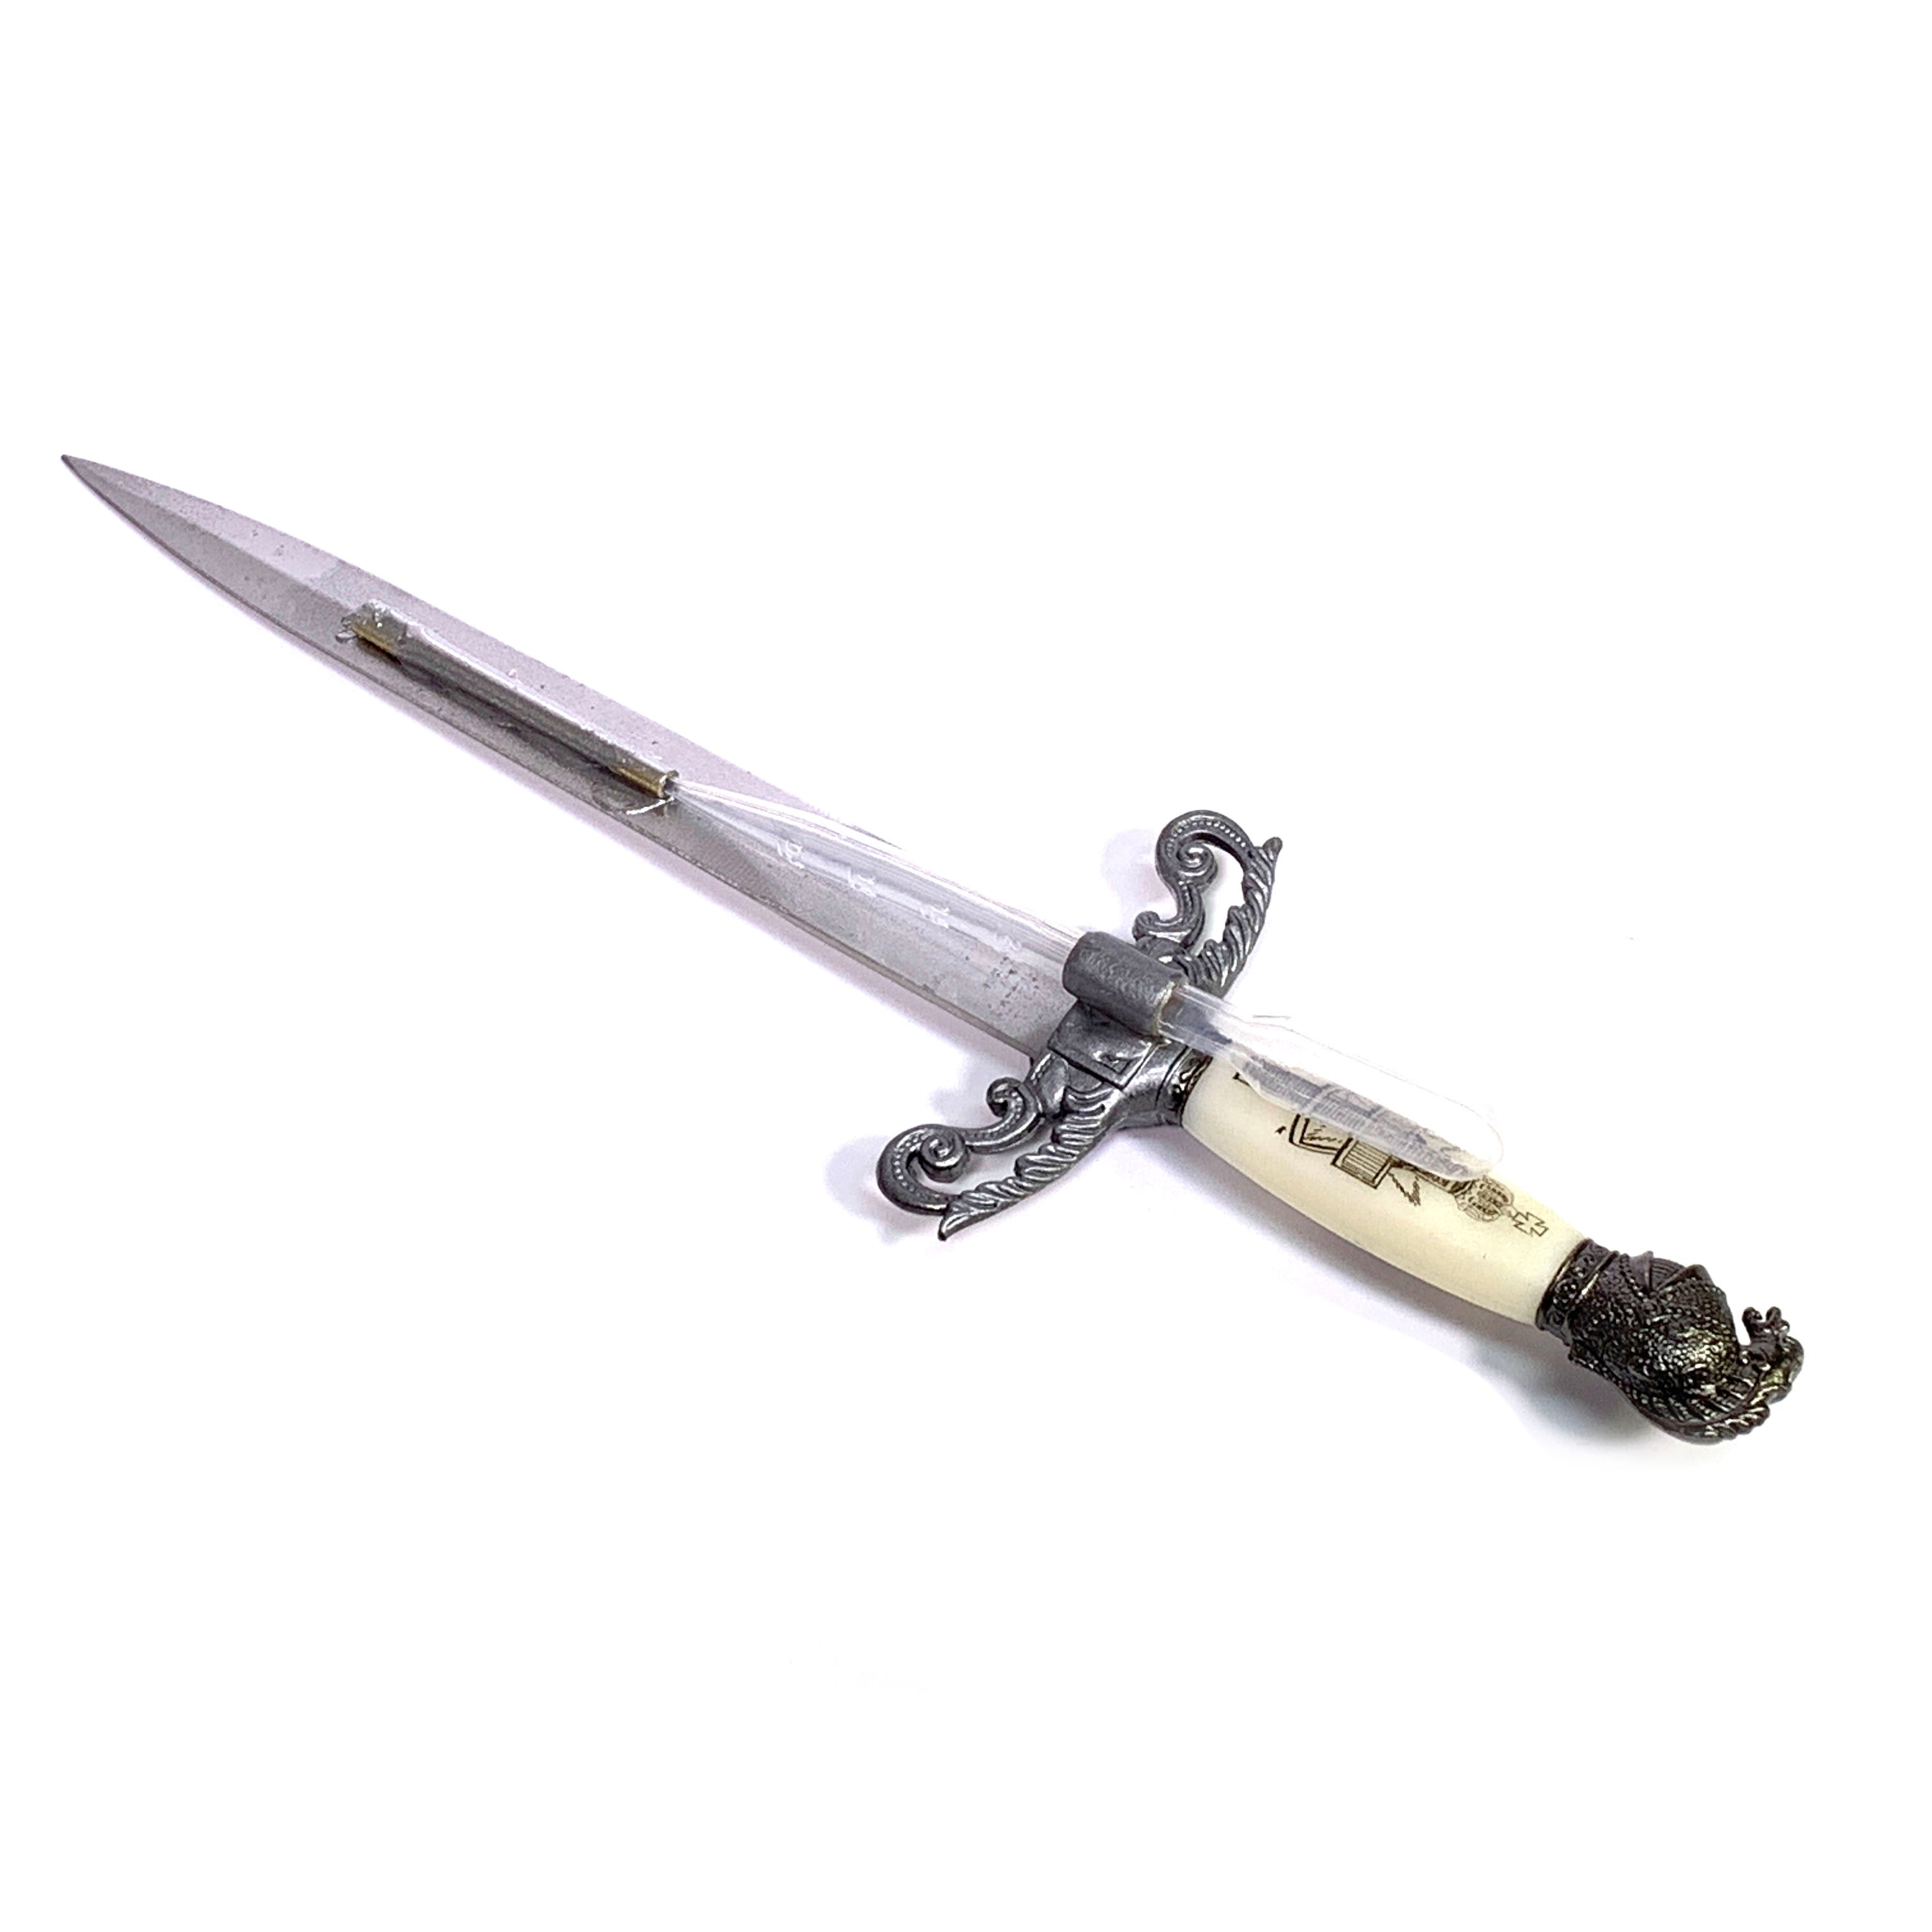 Blood Emitting Metal Medieval Dagger Prop with Special FX Rig